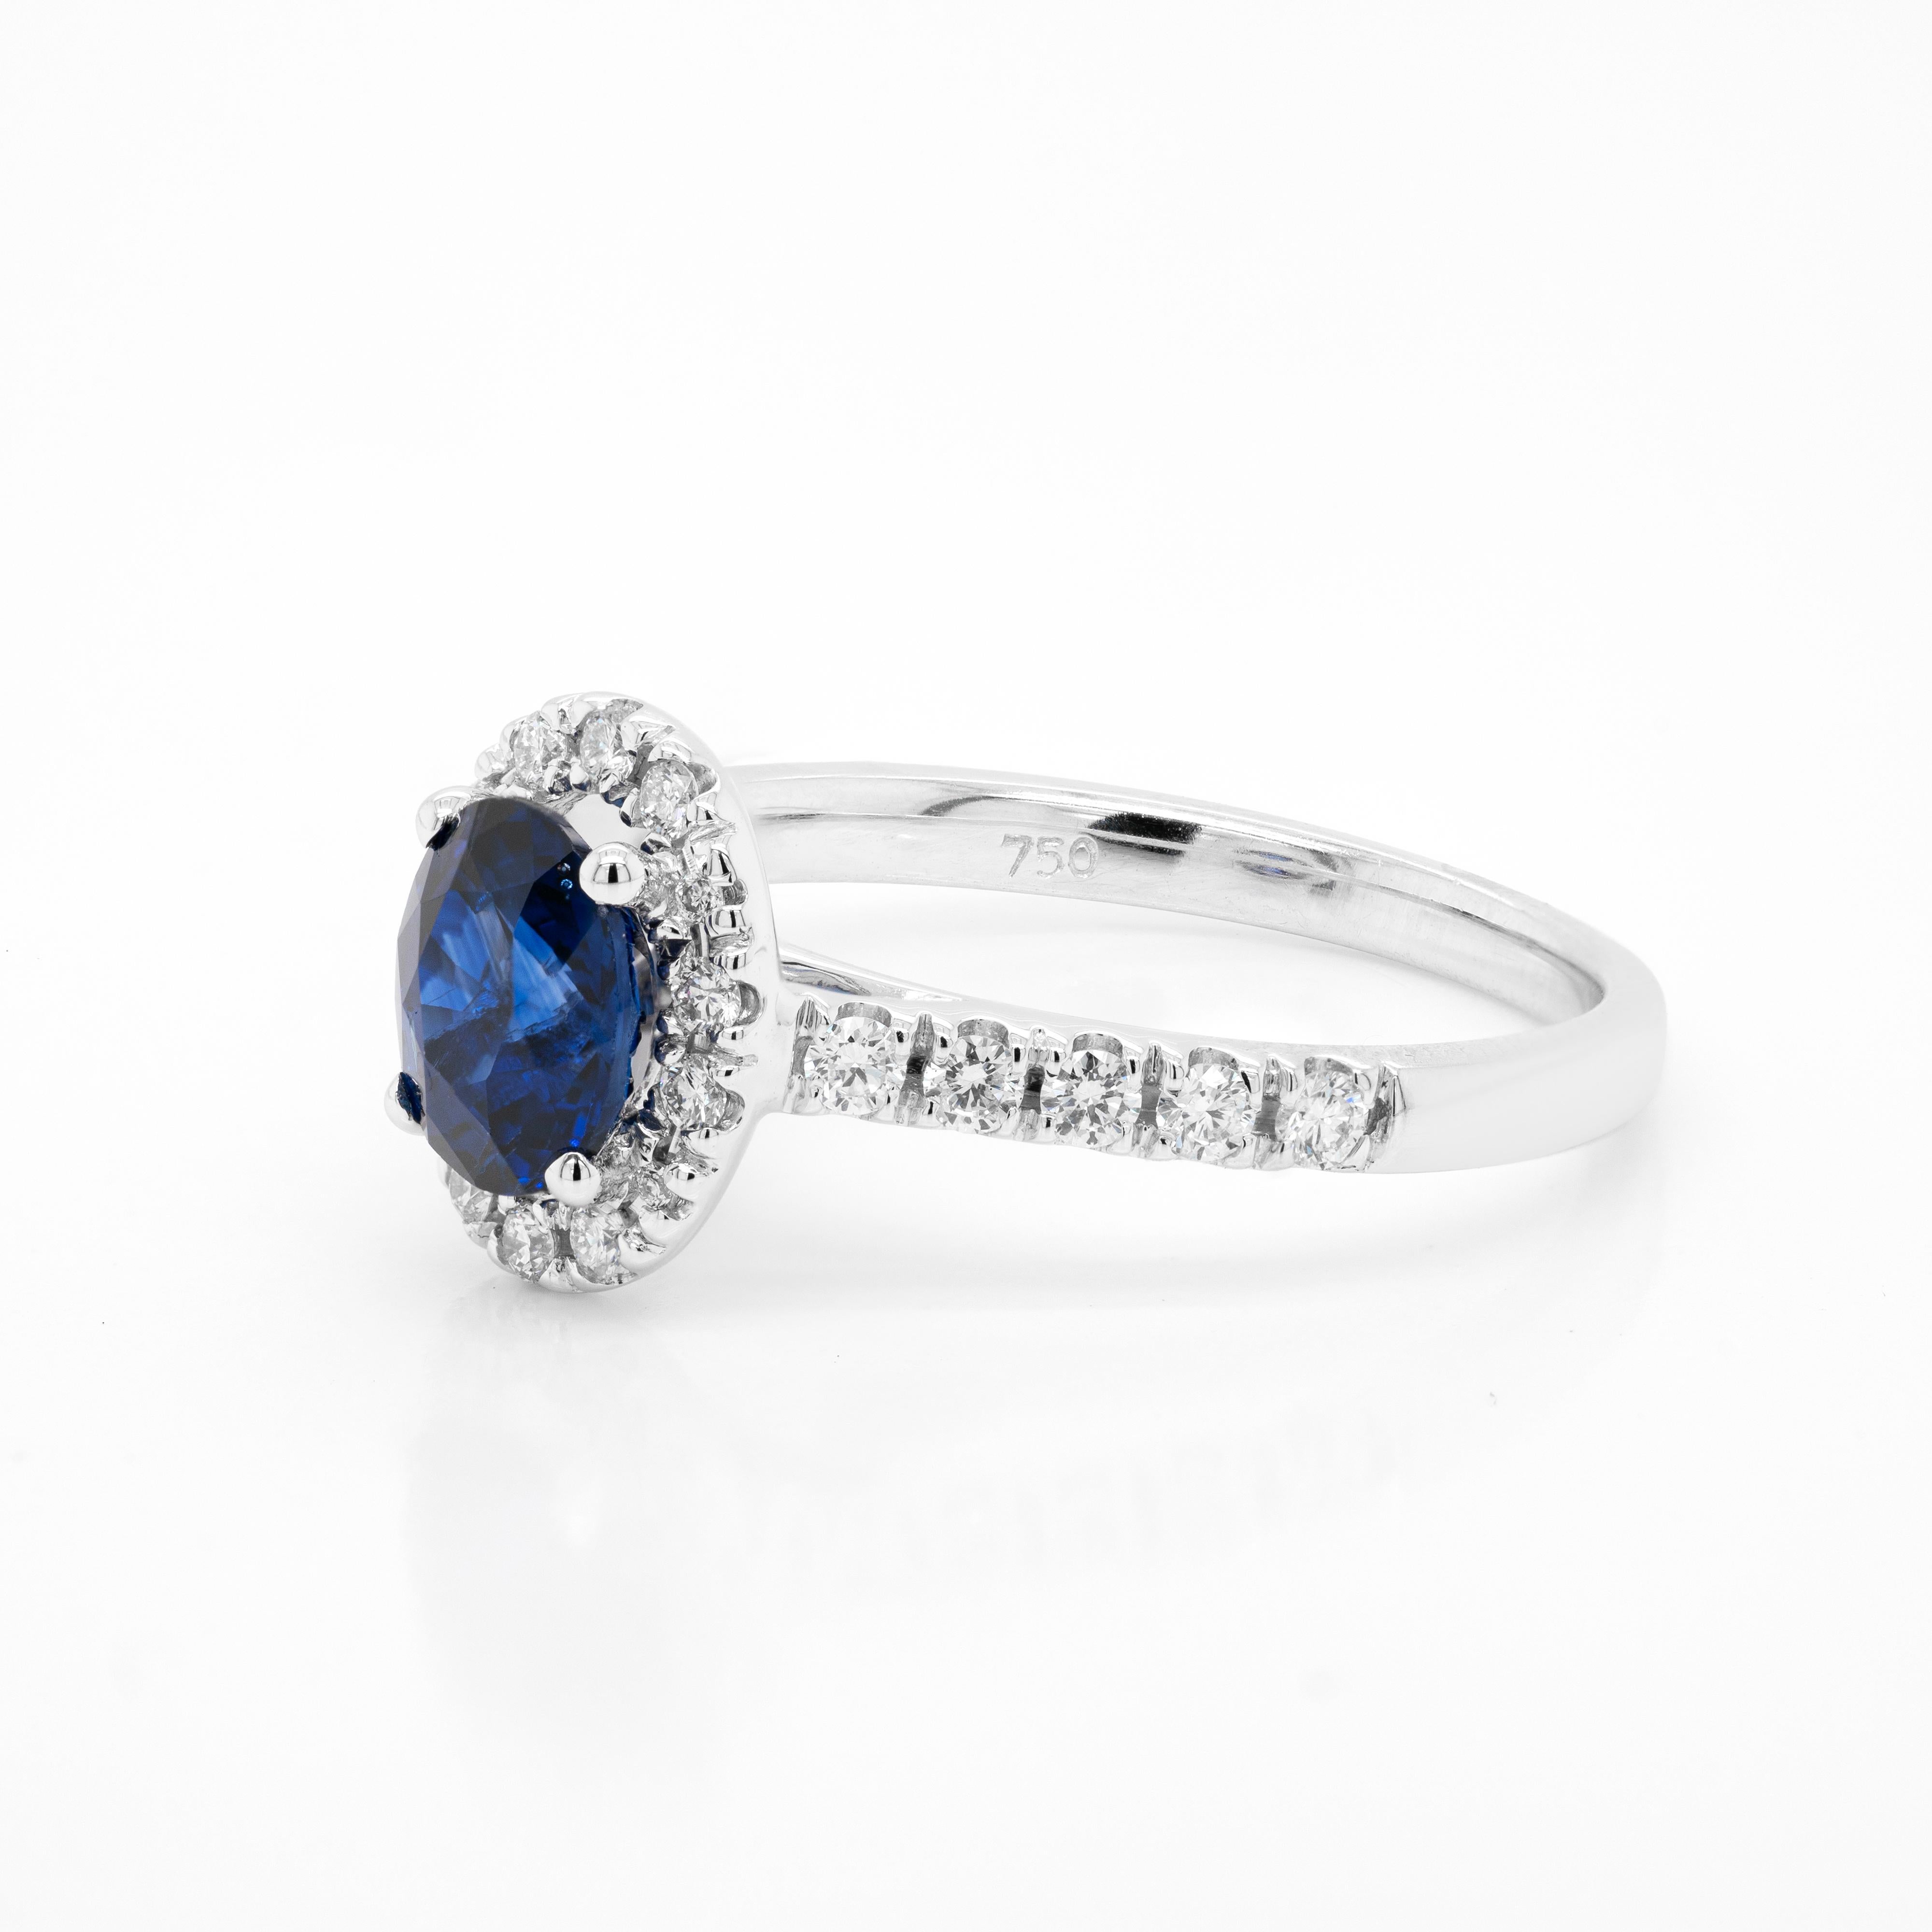 This wonderful engagement ring features a beautiful oval blue sapphire weighing 1.20ct, mounted in a four claw, open back setting. The vibrant stone is surrounded by a halo of 14 round brilliant cut diamonds sat atop a delicate diamond set shank